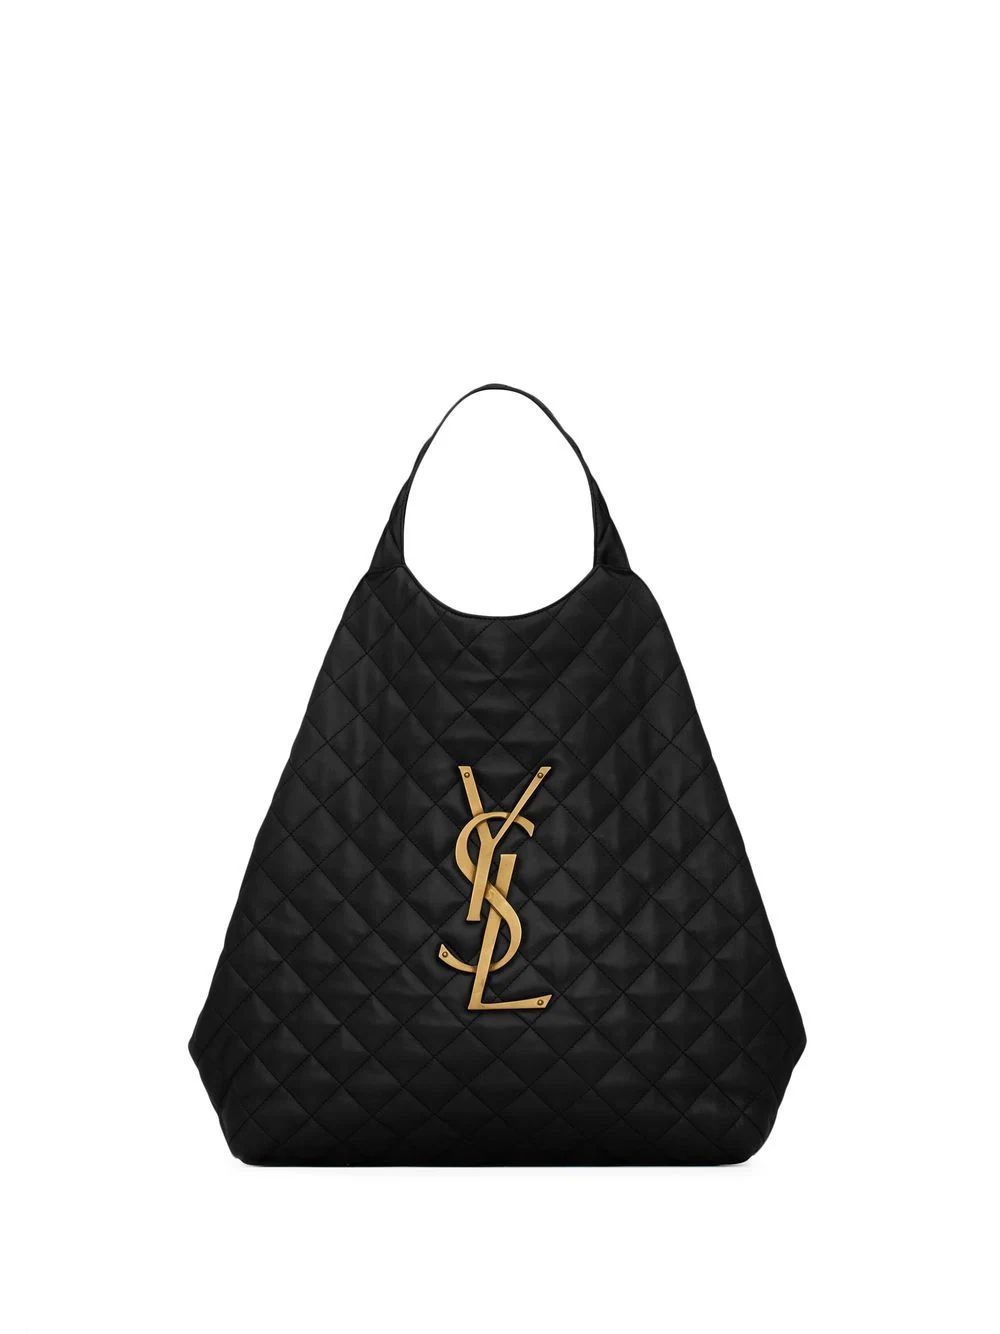 Saint Laurent Icare Maxi Quilted Tote Bag - Farfetch | Farfetch Global